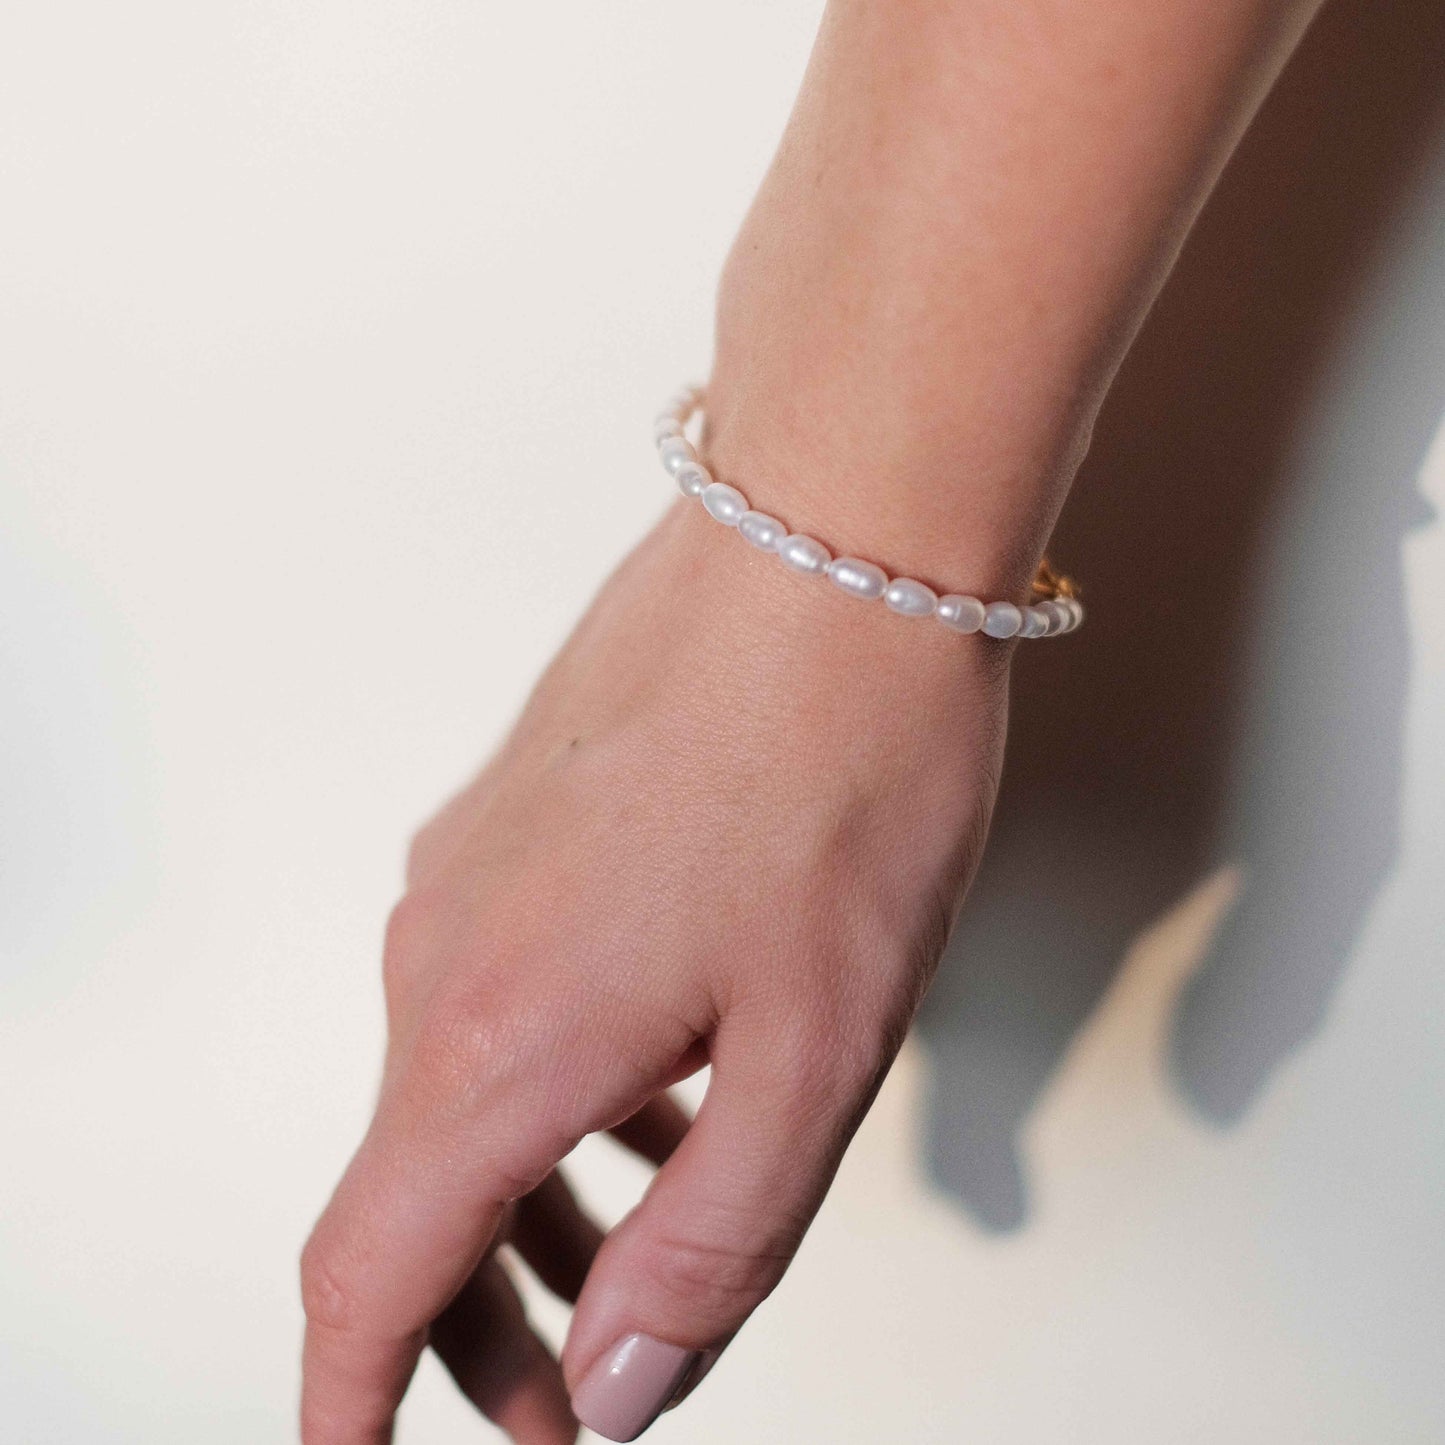 Pearl bracelet with gold plated / silver details